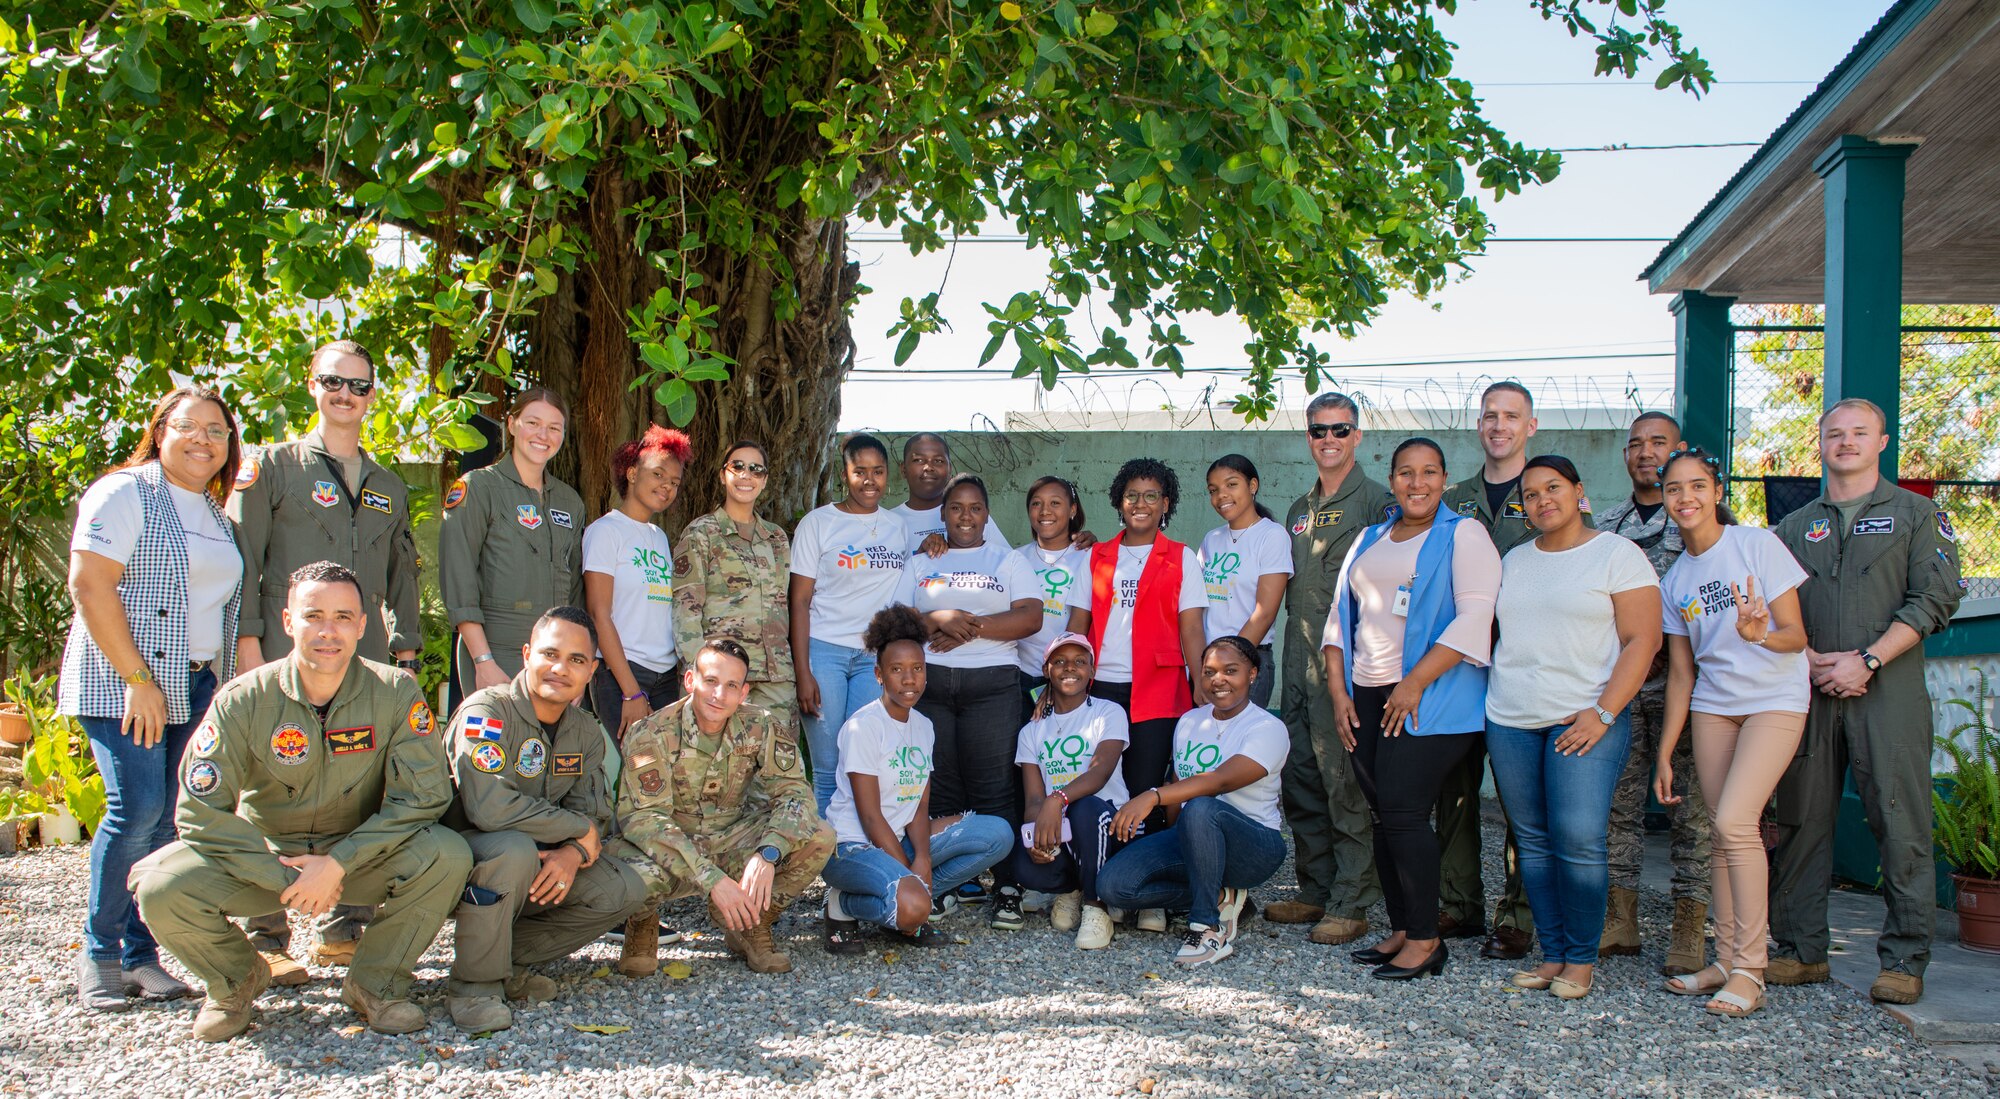 Members from the U.S. Air Force, Fuerza Aérea de Republica Dominicana (FARD) and Boca Chica Youth Network pose for a group photo at the La Casona community center, Dominican Republic, Feb. 21, 2023. The network was established in 2021 as part of a social investment to empower youth in designing and implementing actions to promote youth development within the community. Service members exchanged experiences about their profession and how life skillsplay an important role in career success. (U.S. Air Force photo by Tech. Sgt. Jessica H. Smith-McMahan)